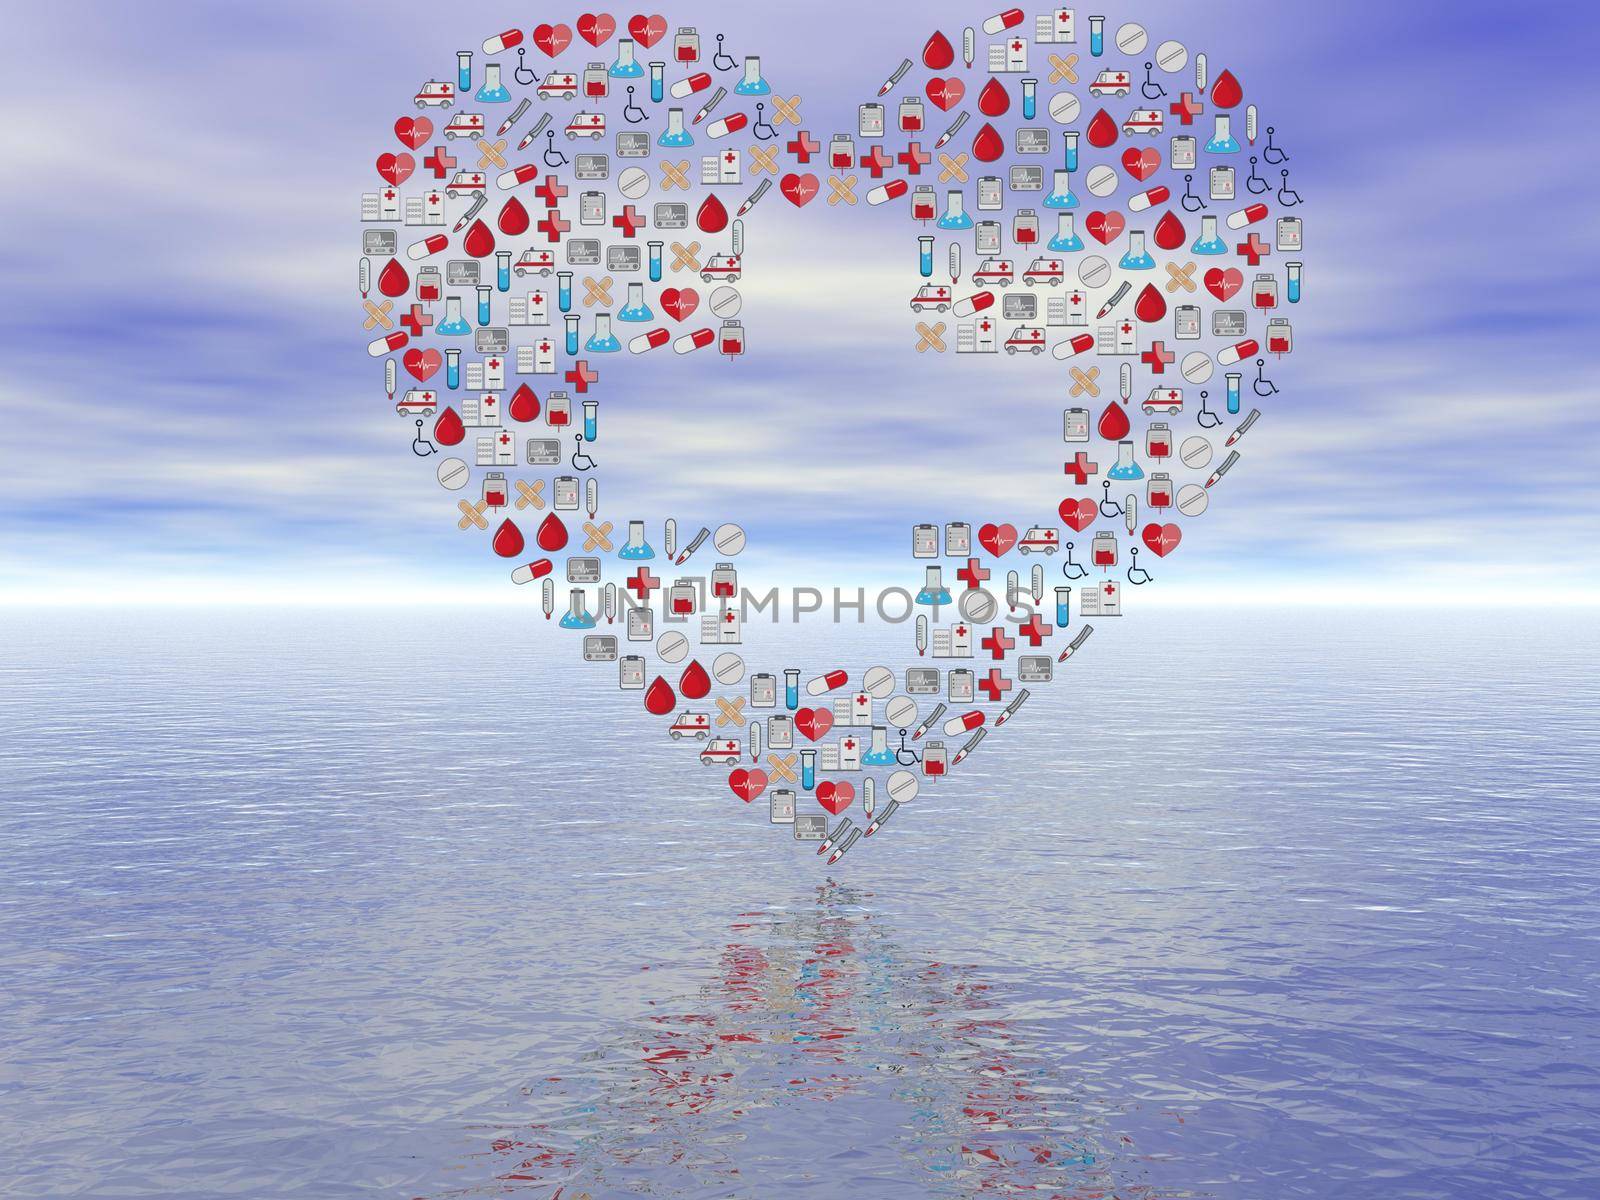 all heart shaped disease logos - 3d rendering by mariephotos